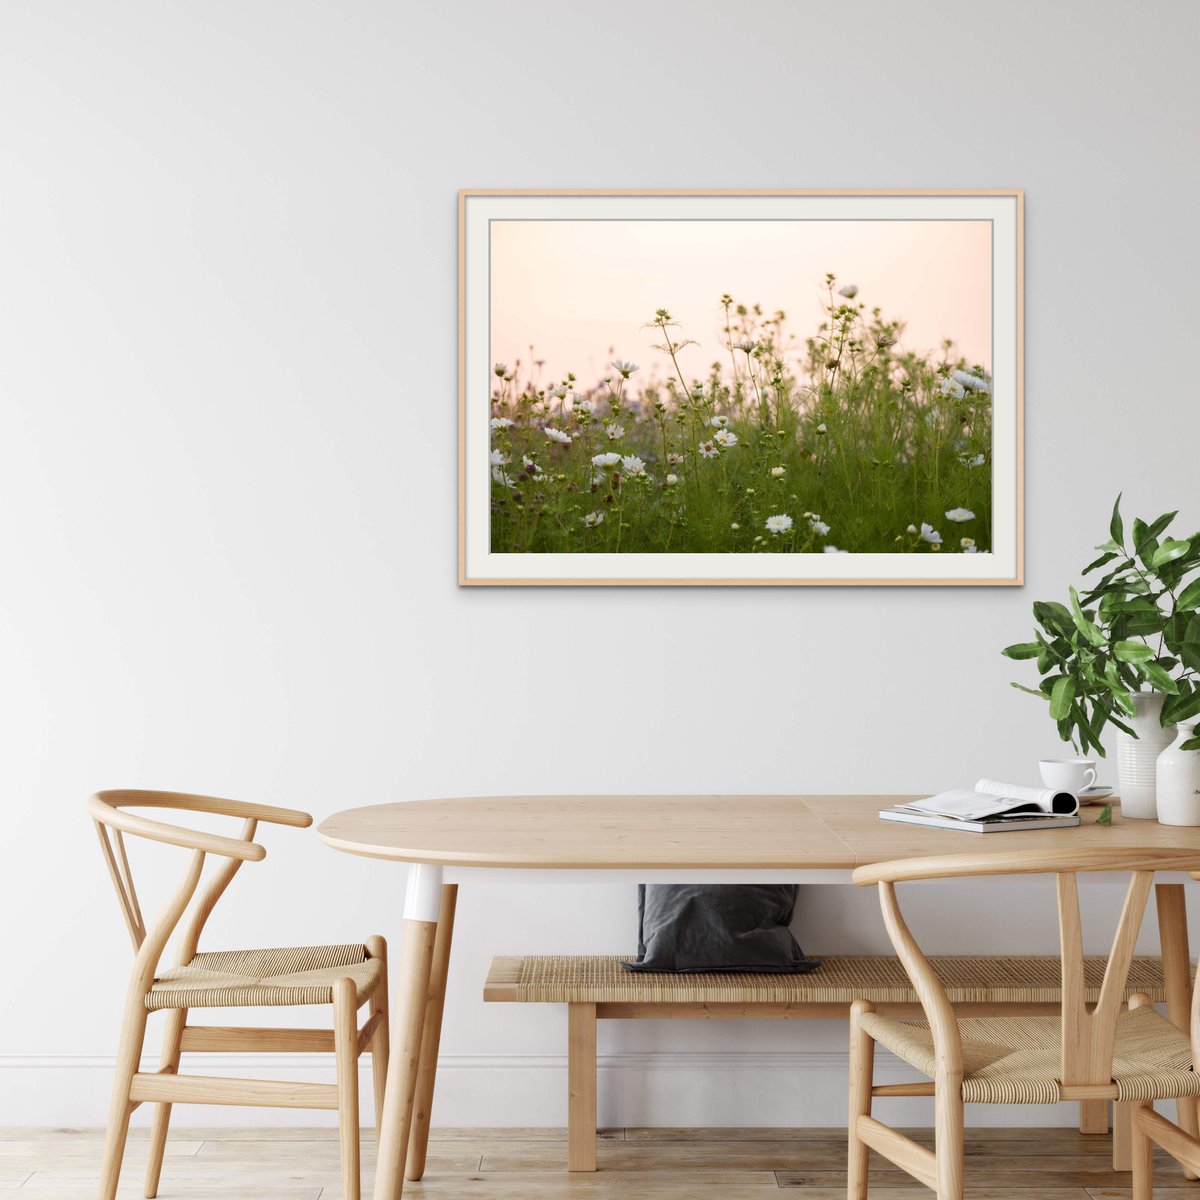 Spring is here! We are celebrating the first day of spring with a new collection of floral photography 🌸 which you can shop on our website! #springdecor #floralphotography #springflowers #framedphotography #wallart #artdecor #artcollection #springcollection #FirstDayofSpring